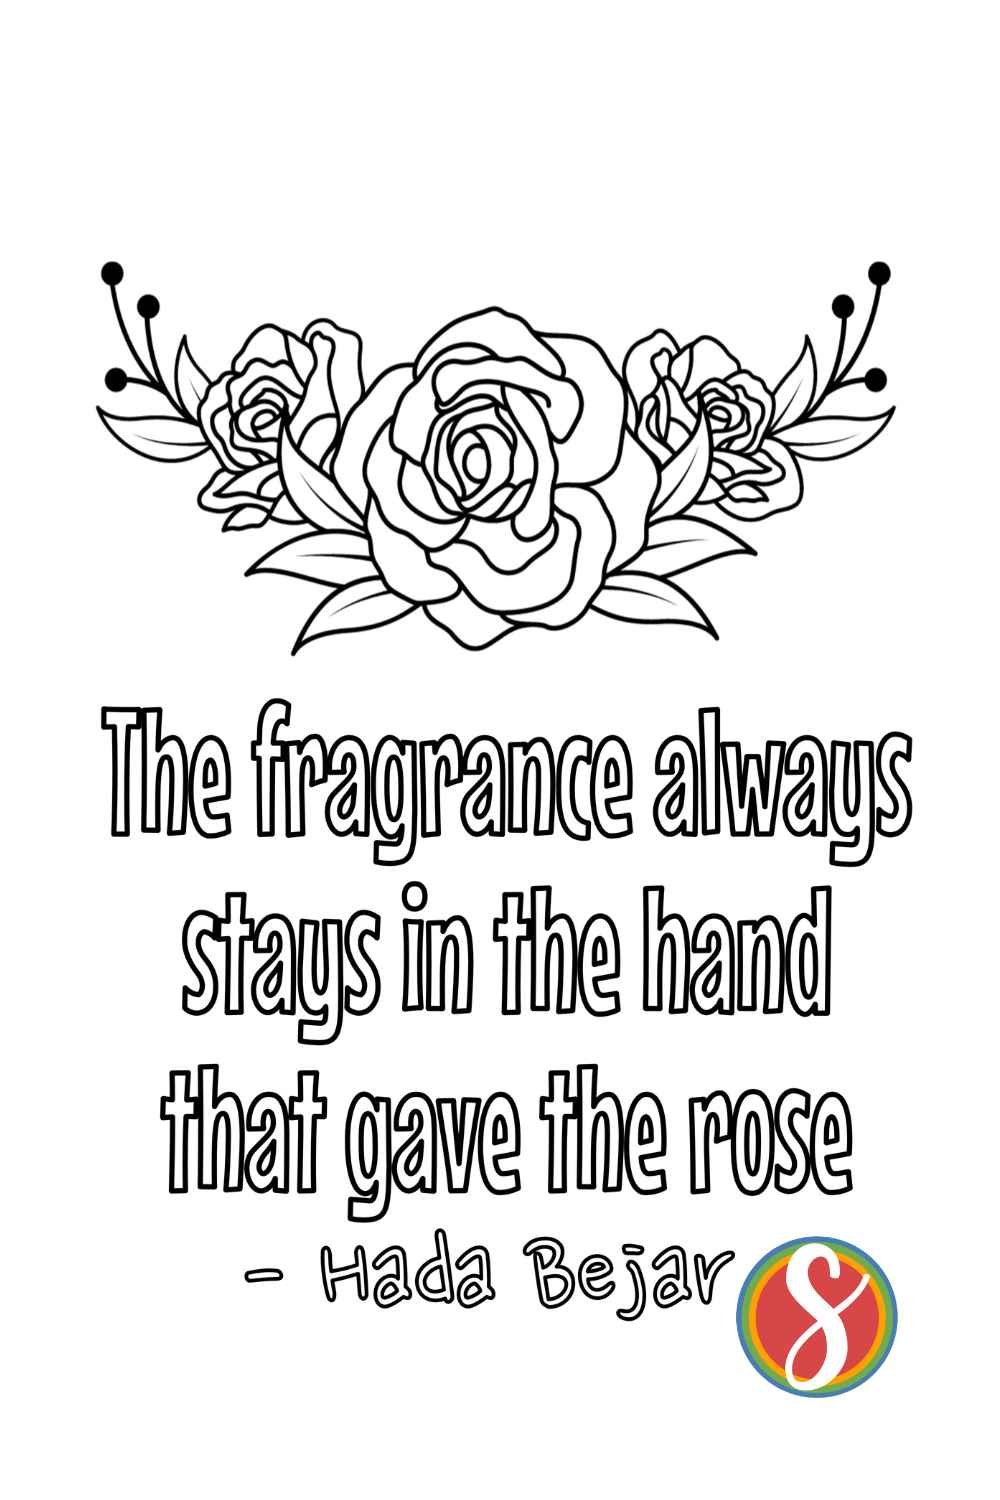 a 3-rose wreath to color with colorable quote  "the fragrance always stays in the hand that gave the rose" - Hada bejar